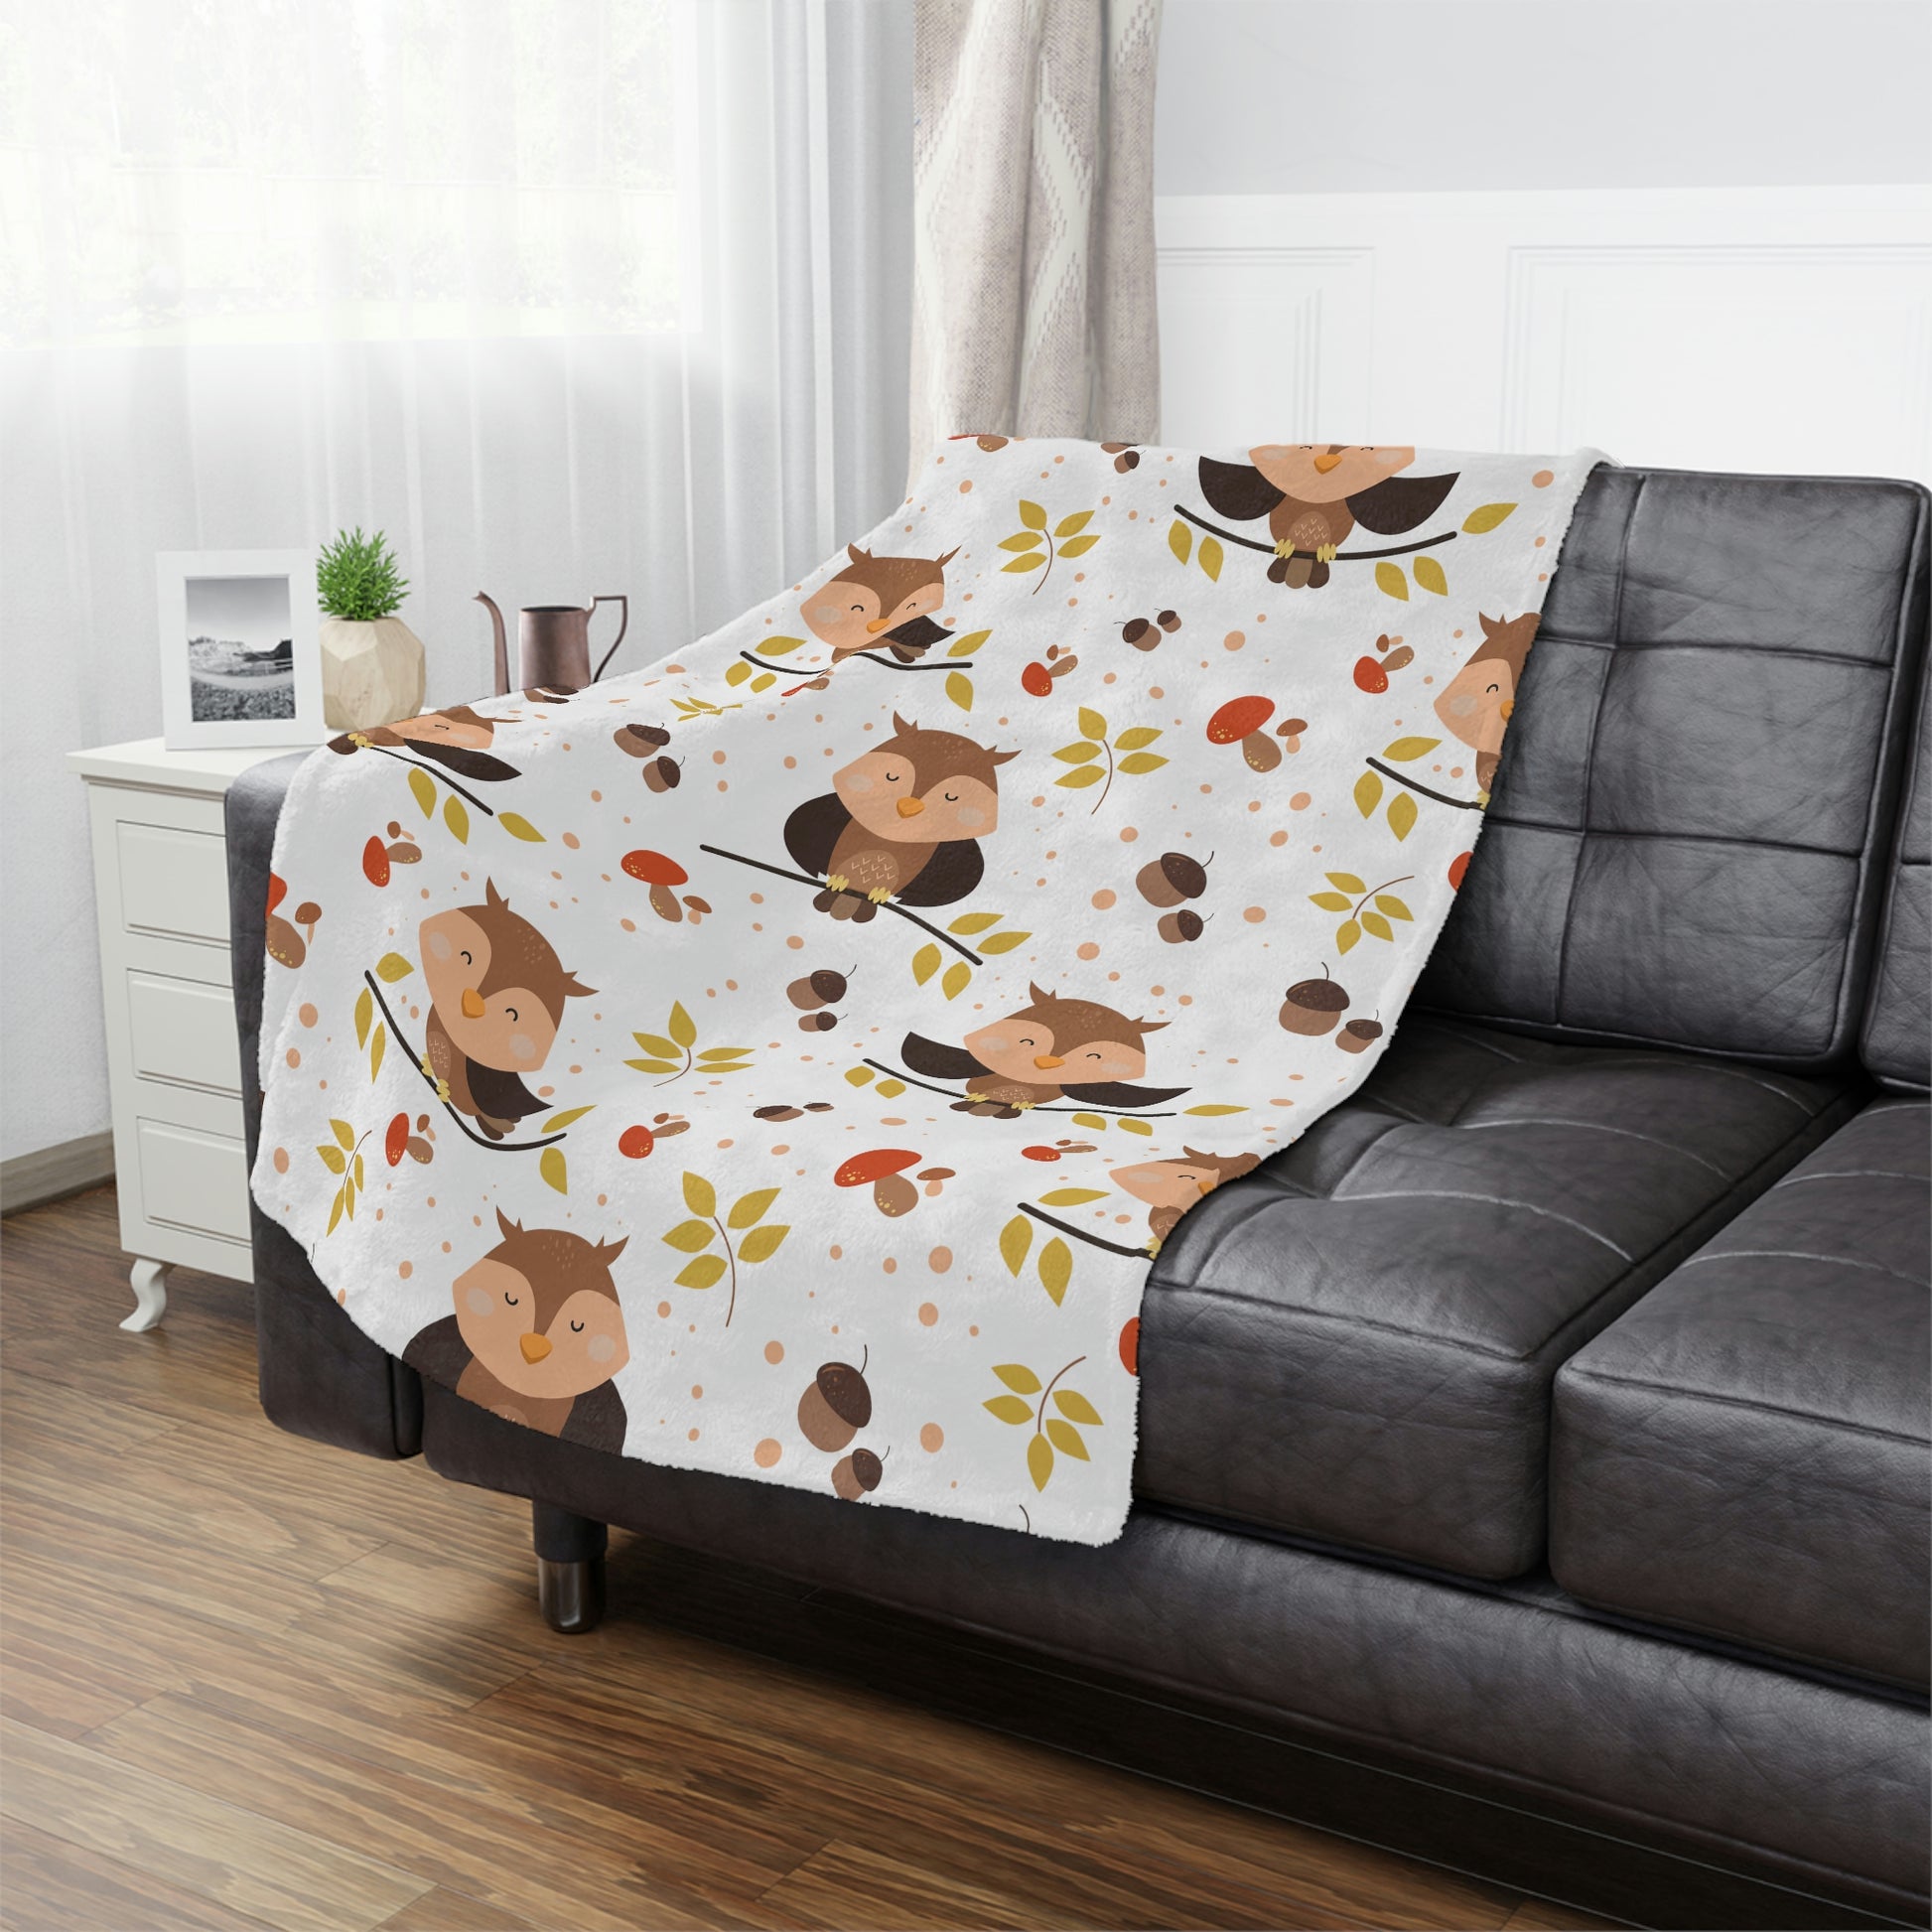 owl baby blanket in a woodland theme nursery, woodland animal plush blanket lying on a bed in a kids playroom, owl throw blanket next to pillows on a woodland animal crib